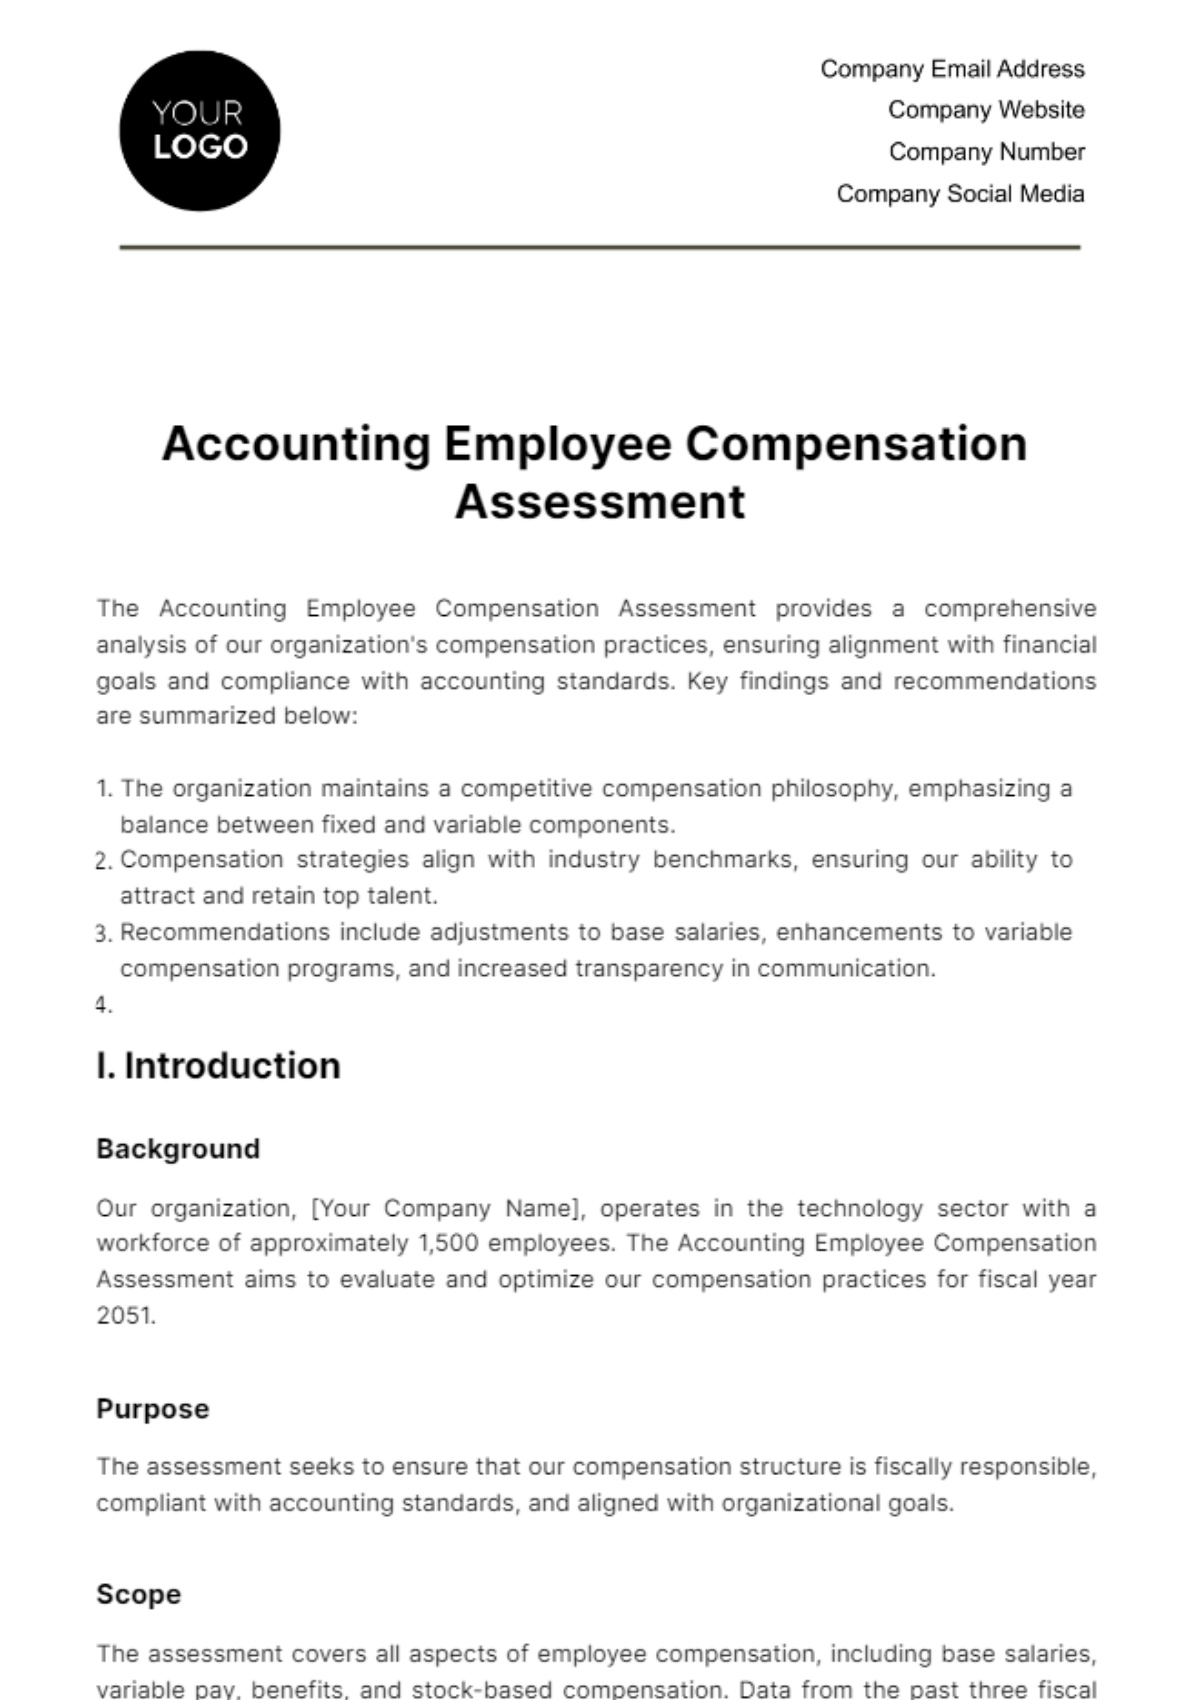 Free Accounting Employee Compensation Assessment Template